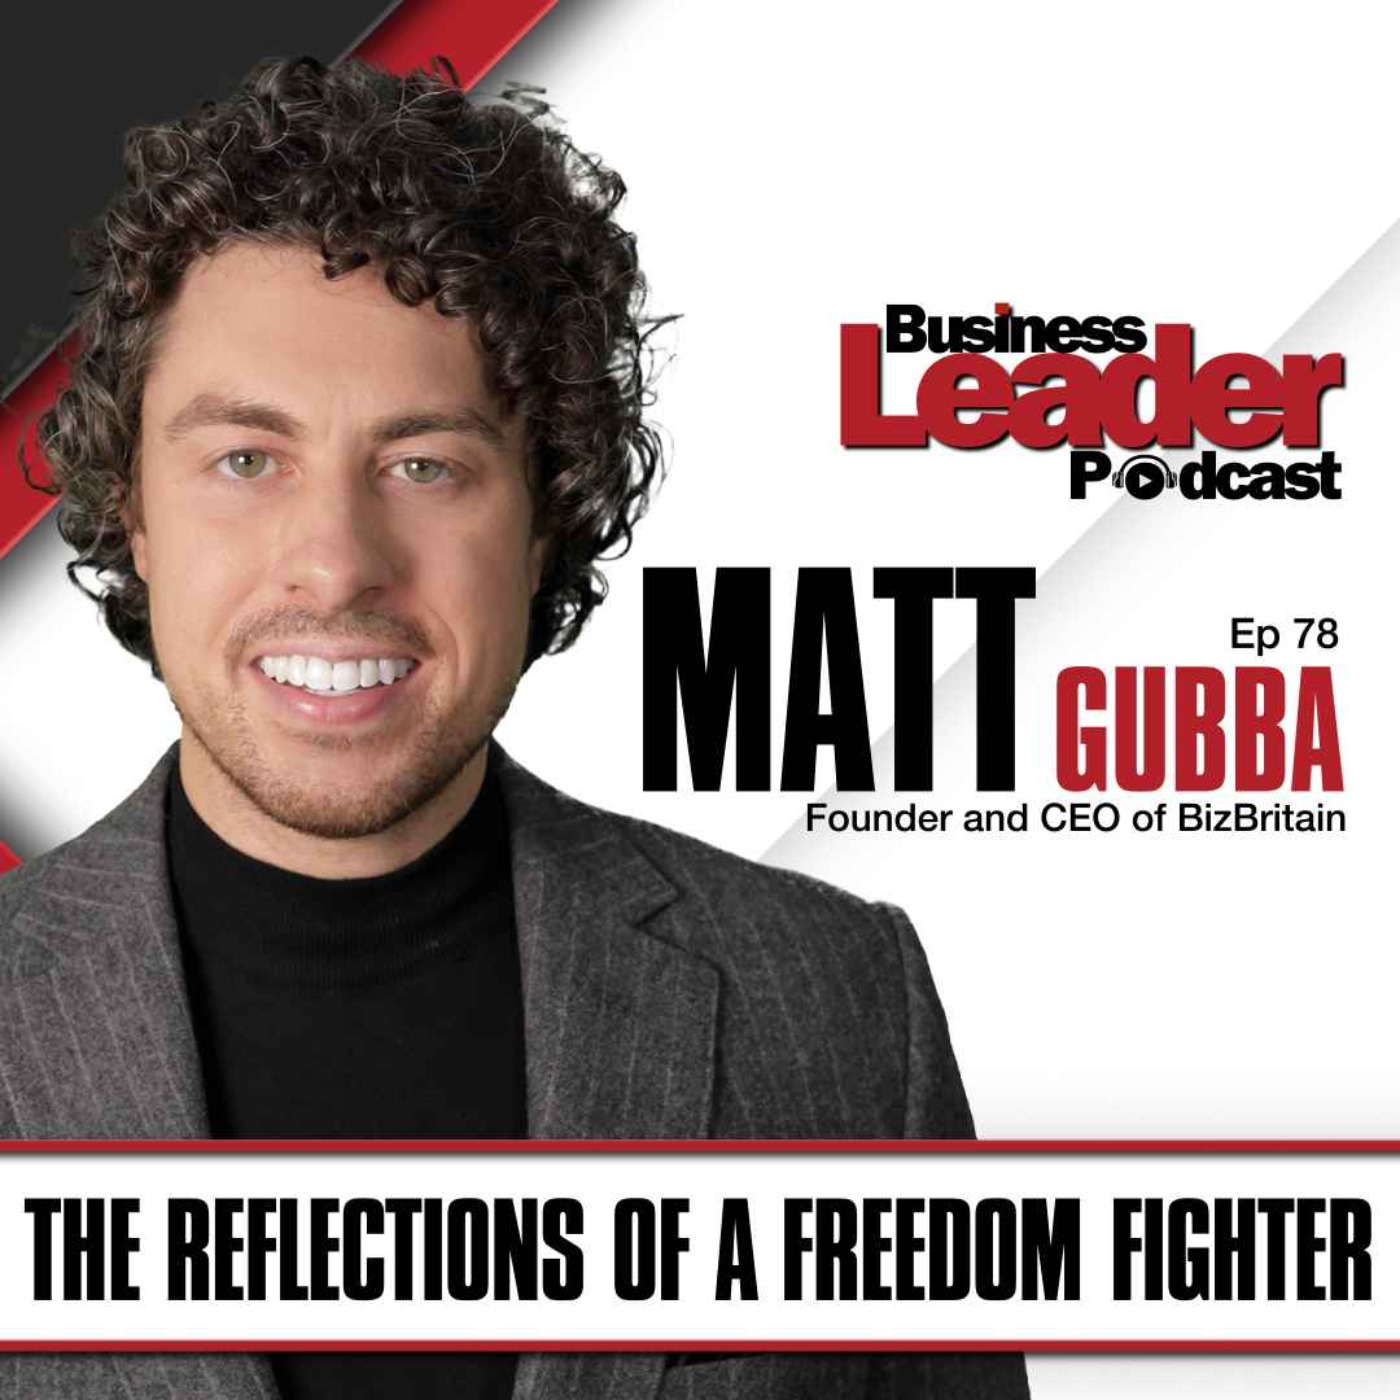 Matt Gubba: The reflections of a freedom fighter